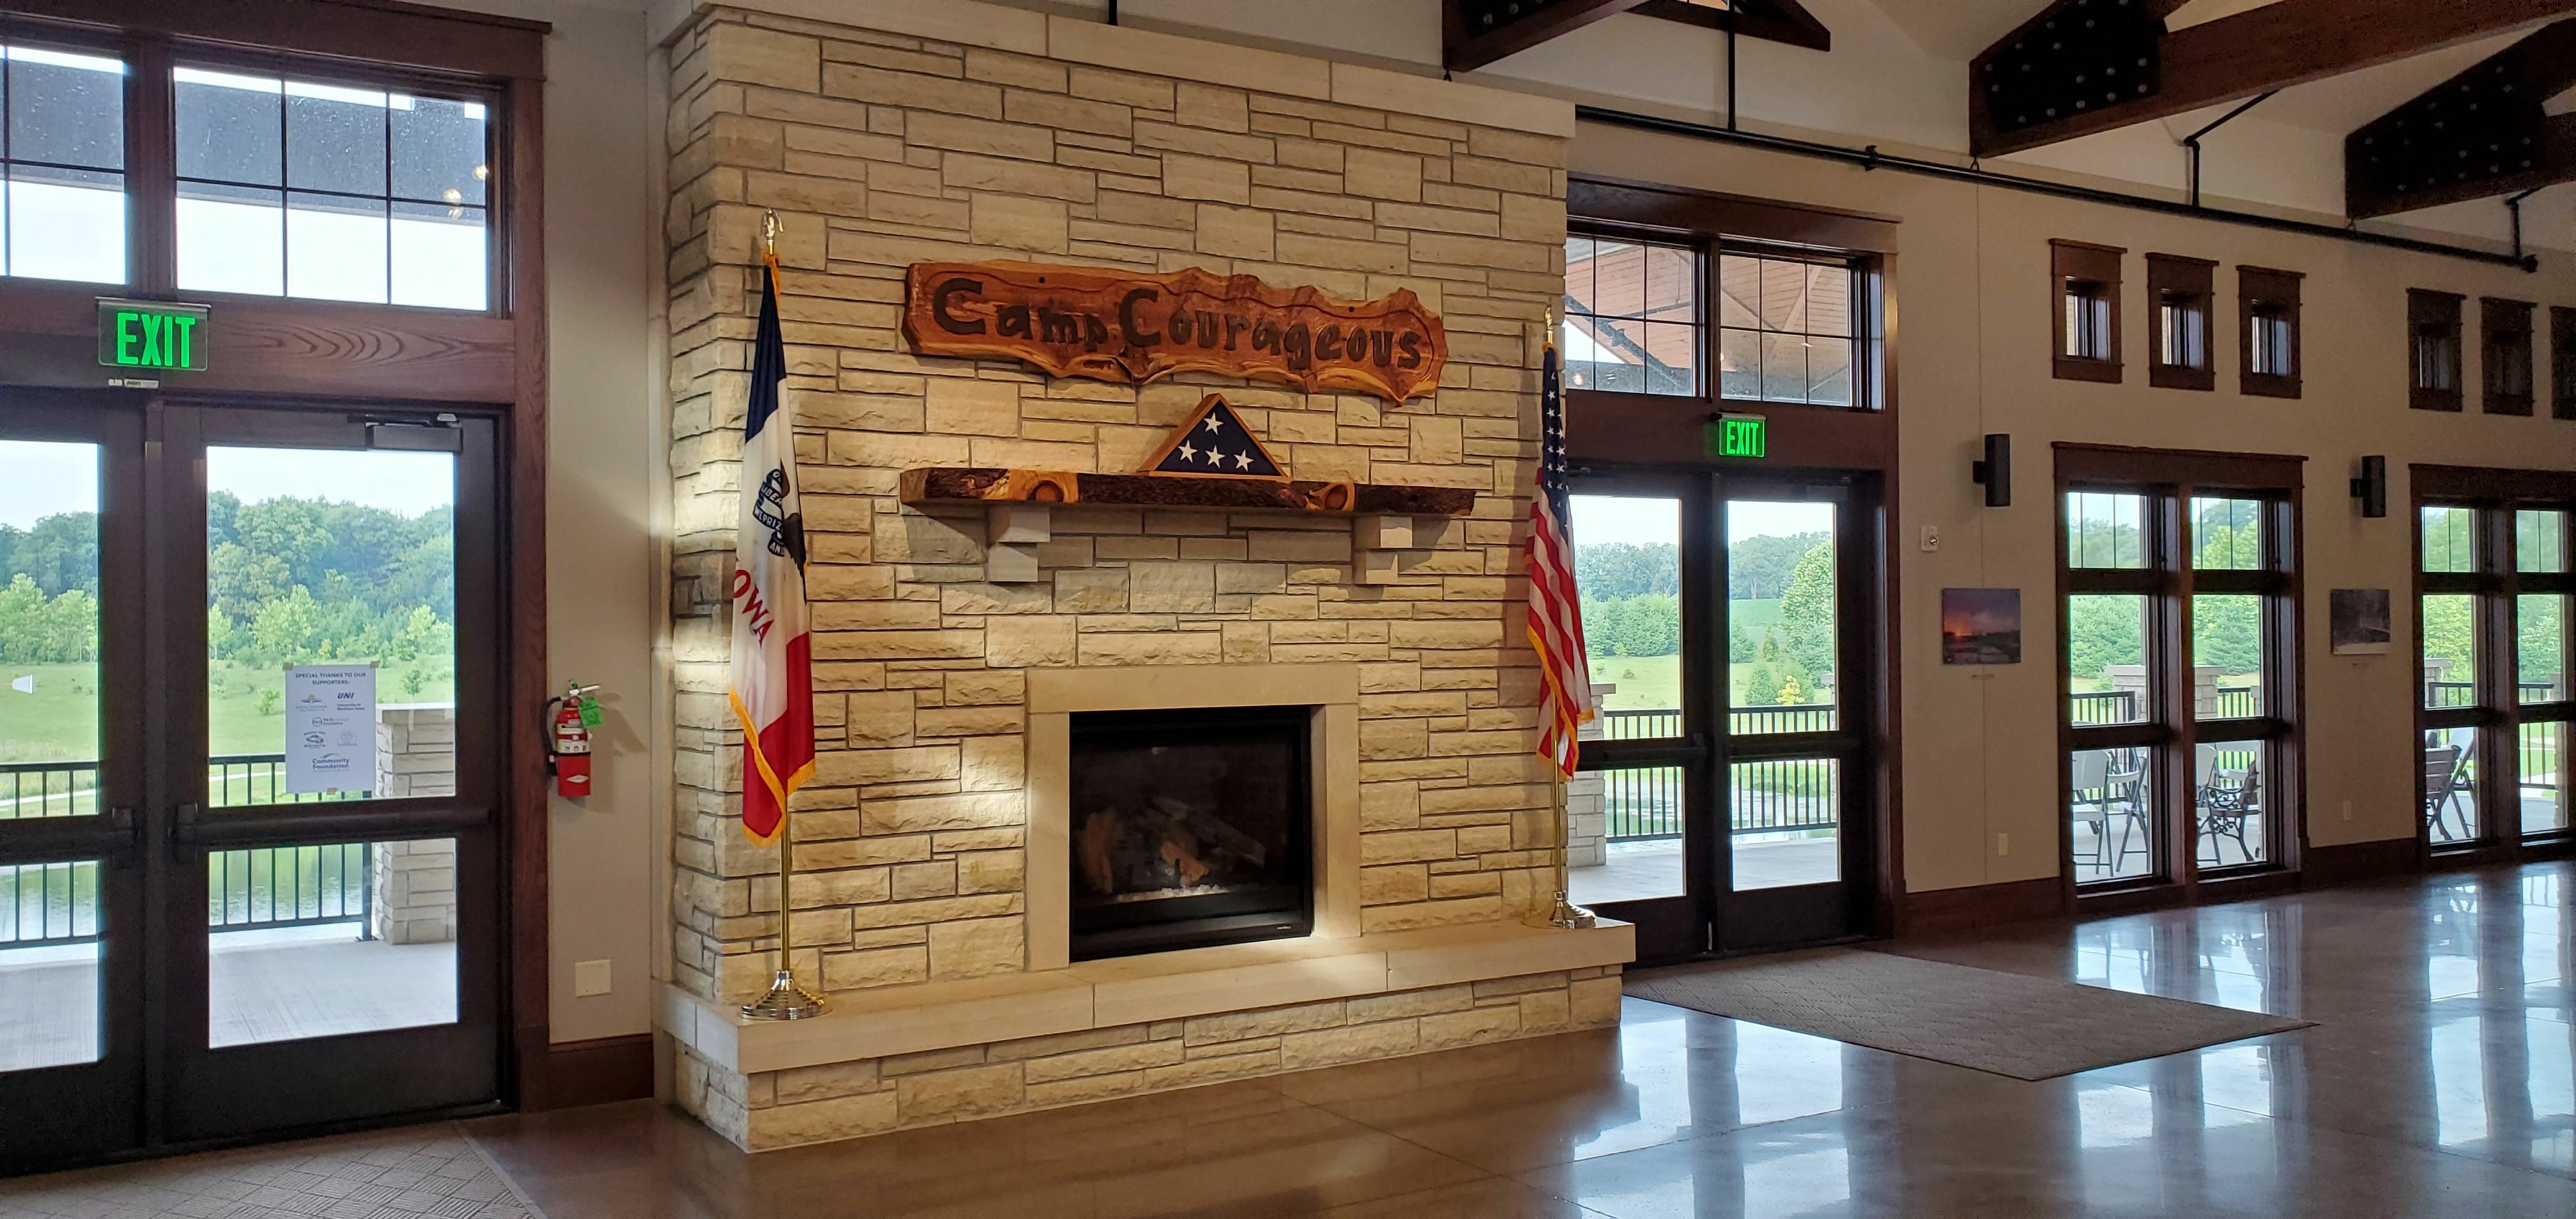 A grand fireplace welcoming attendees to the Retreat.